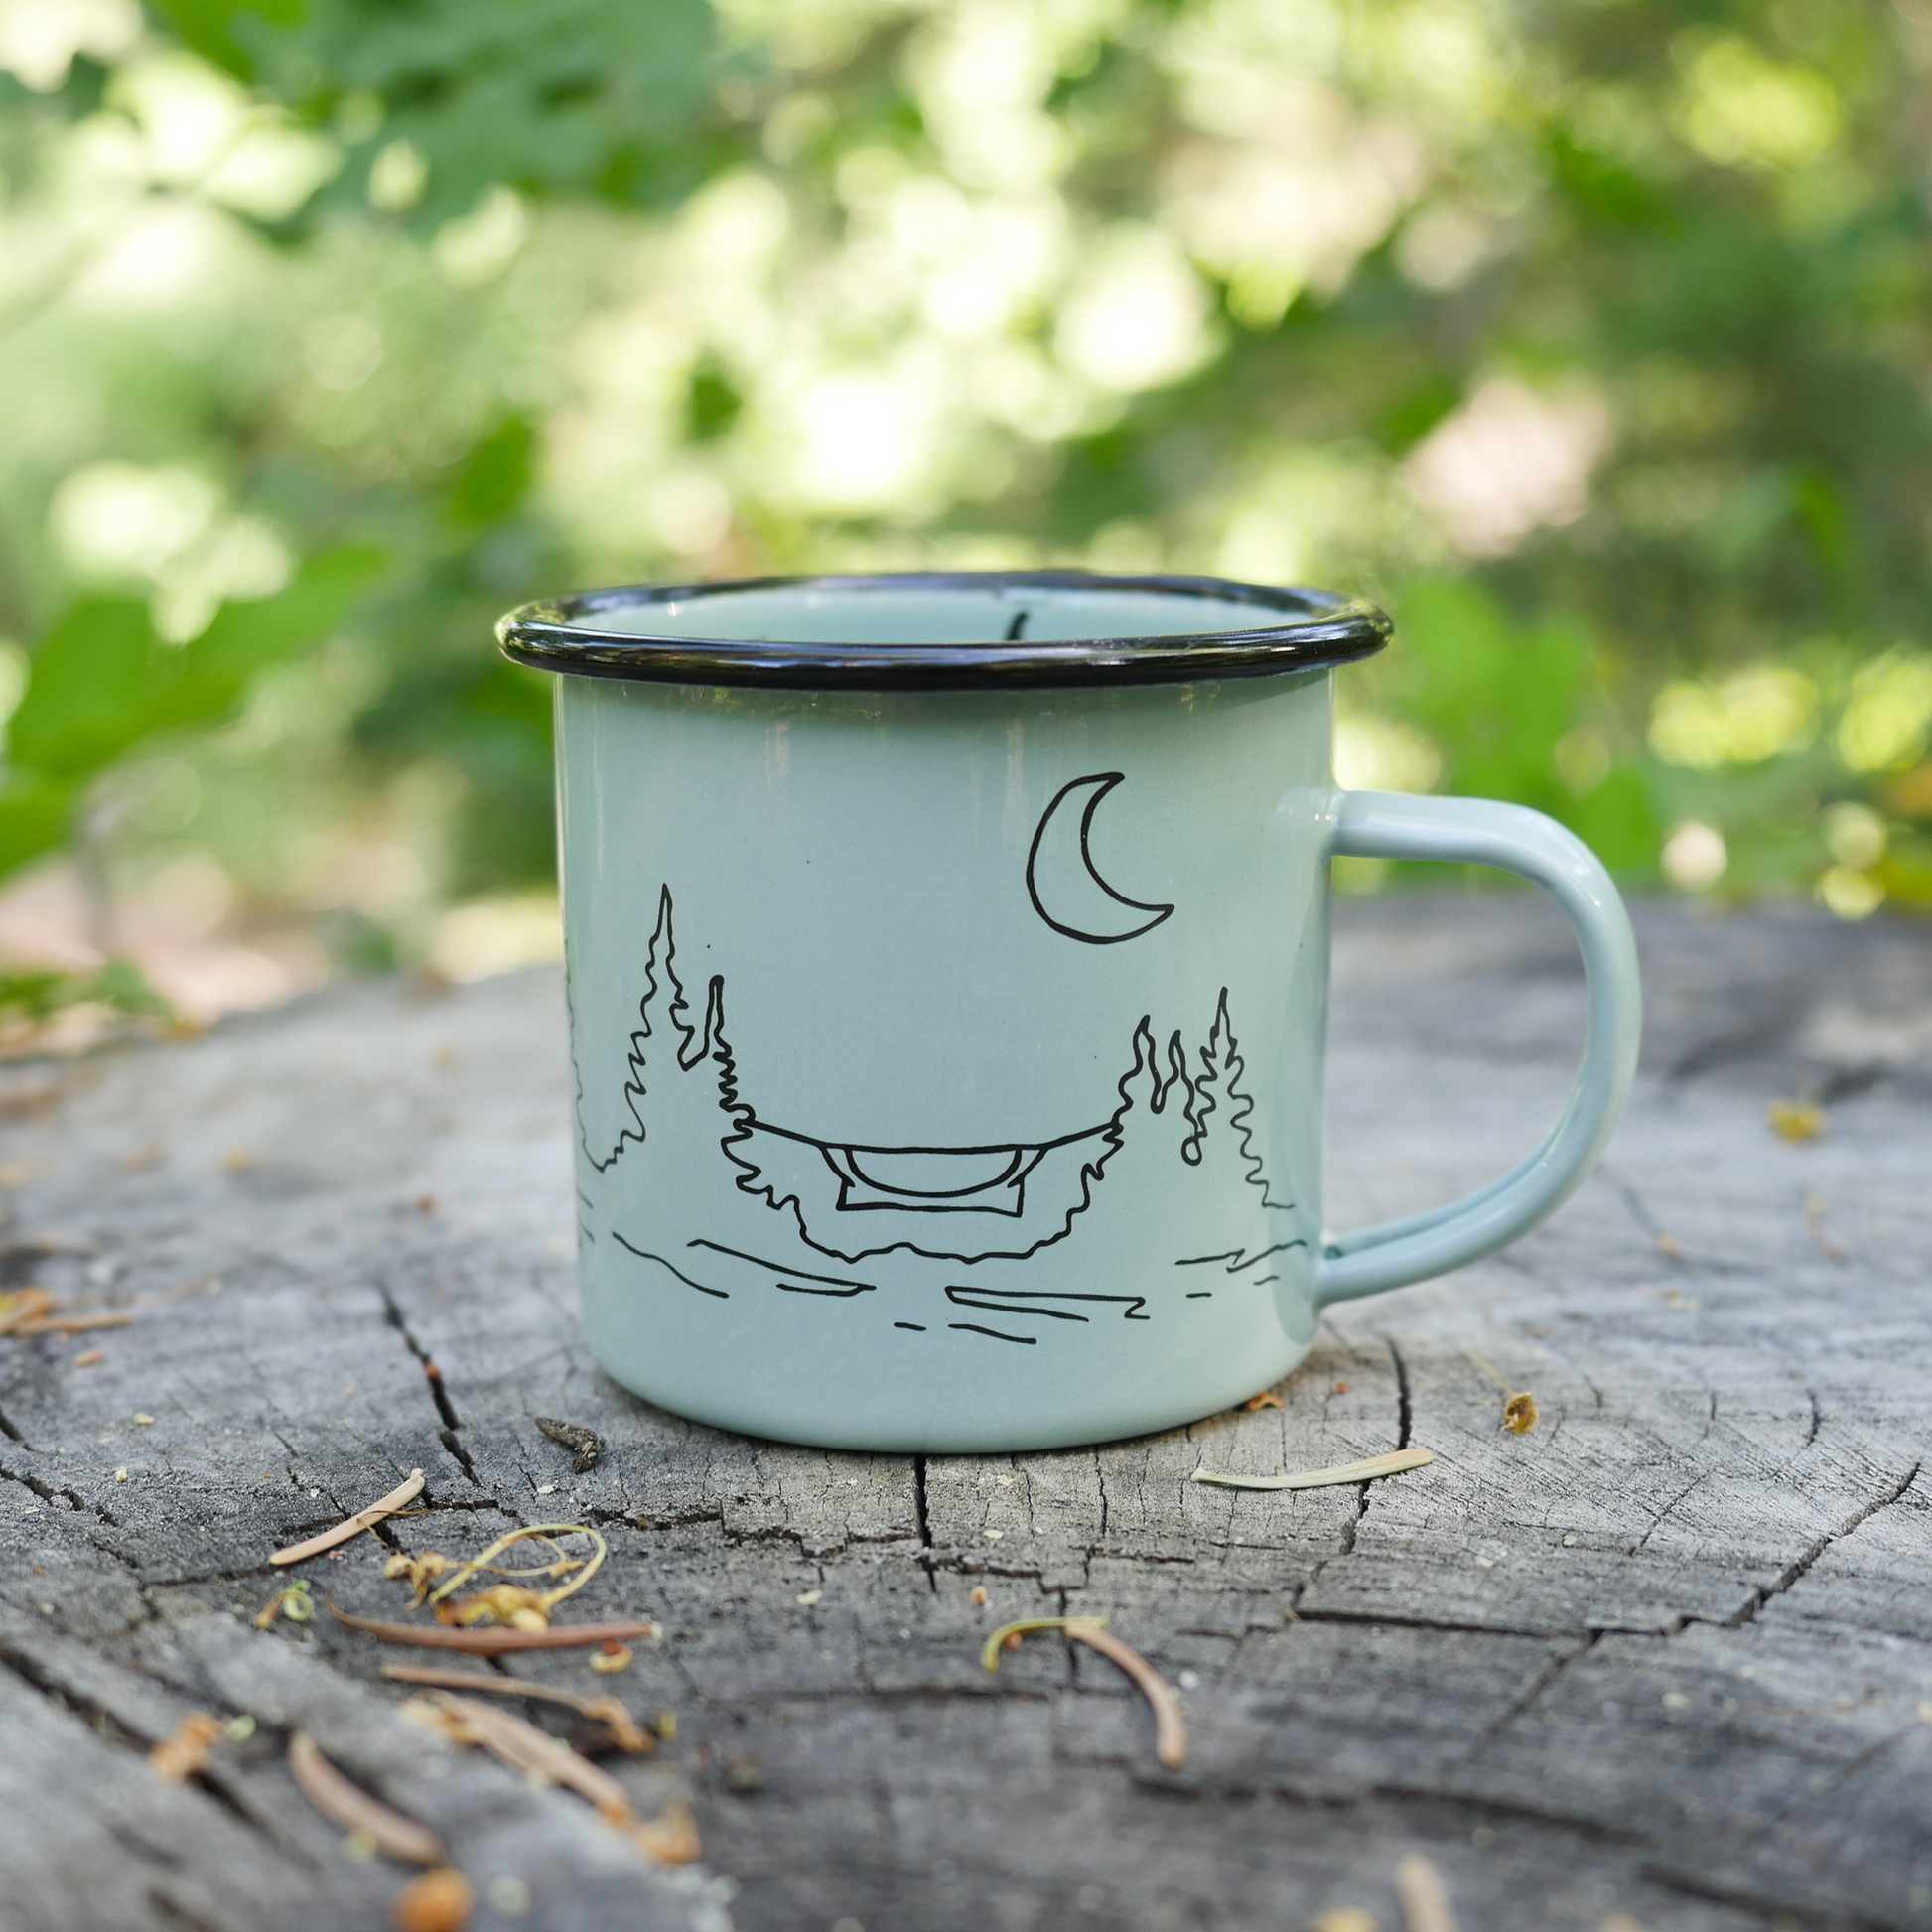 Light blue durable camping mug with campsite illustration